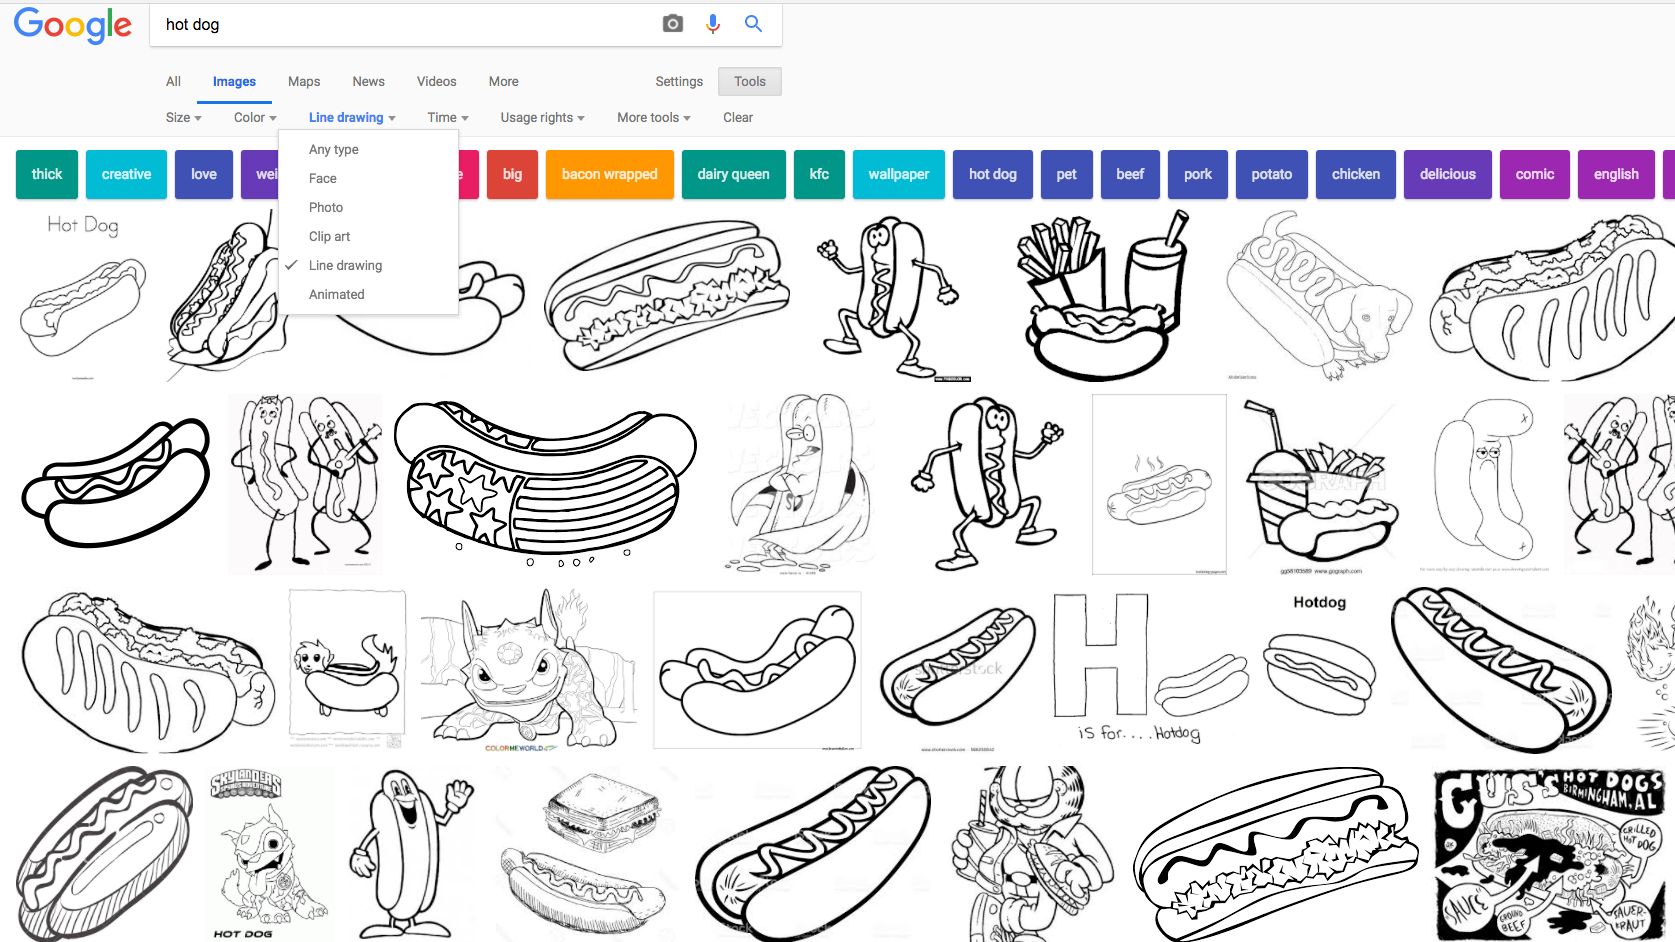 Get Free Kids’ Colouring Pages Using Google Images